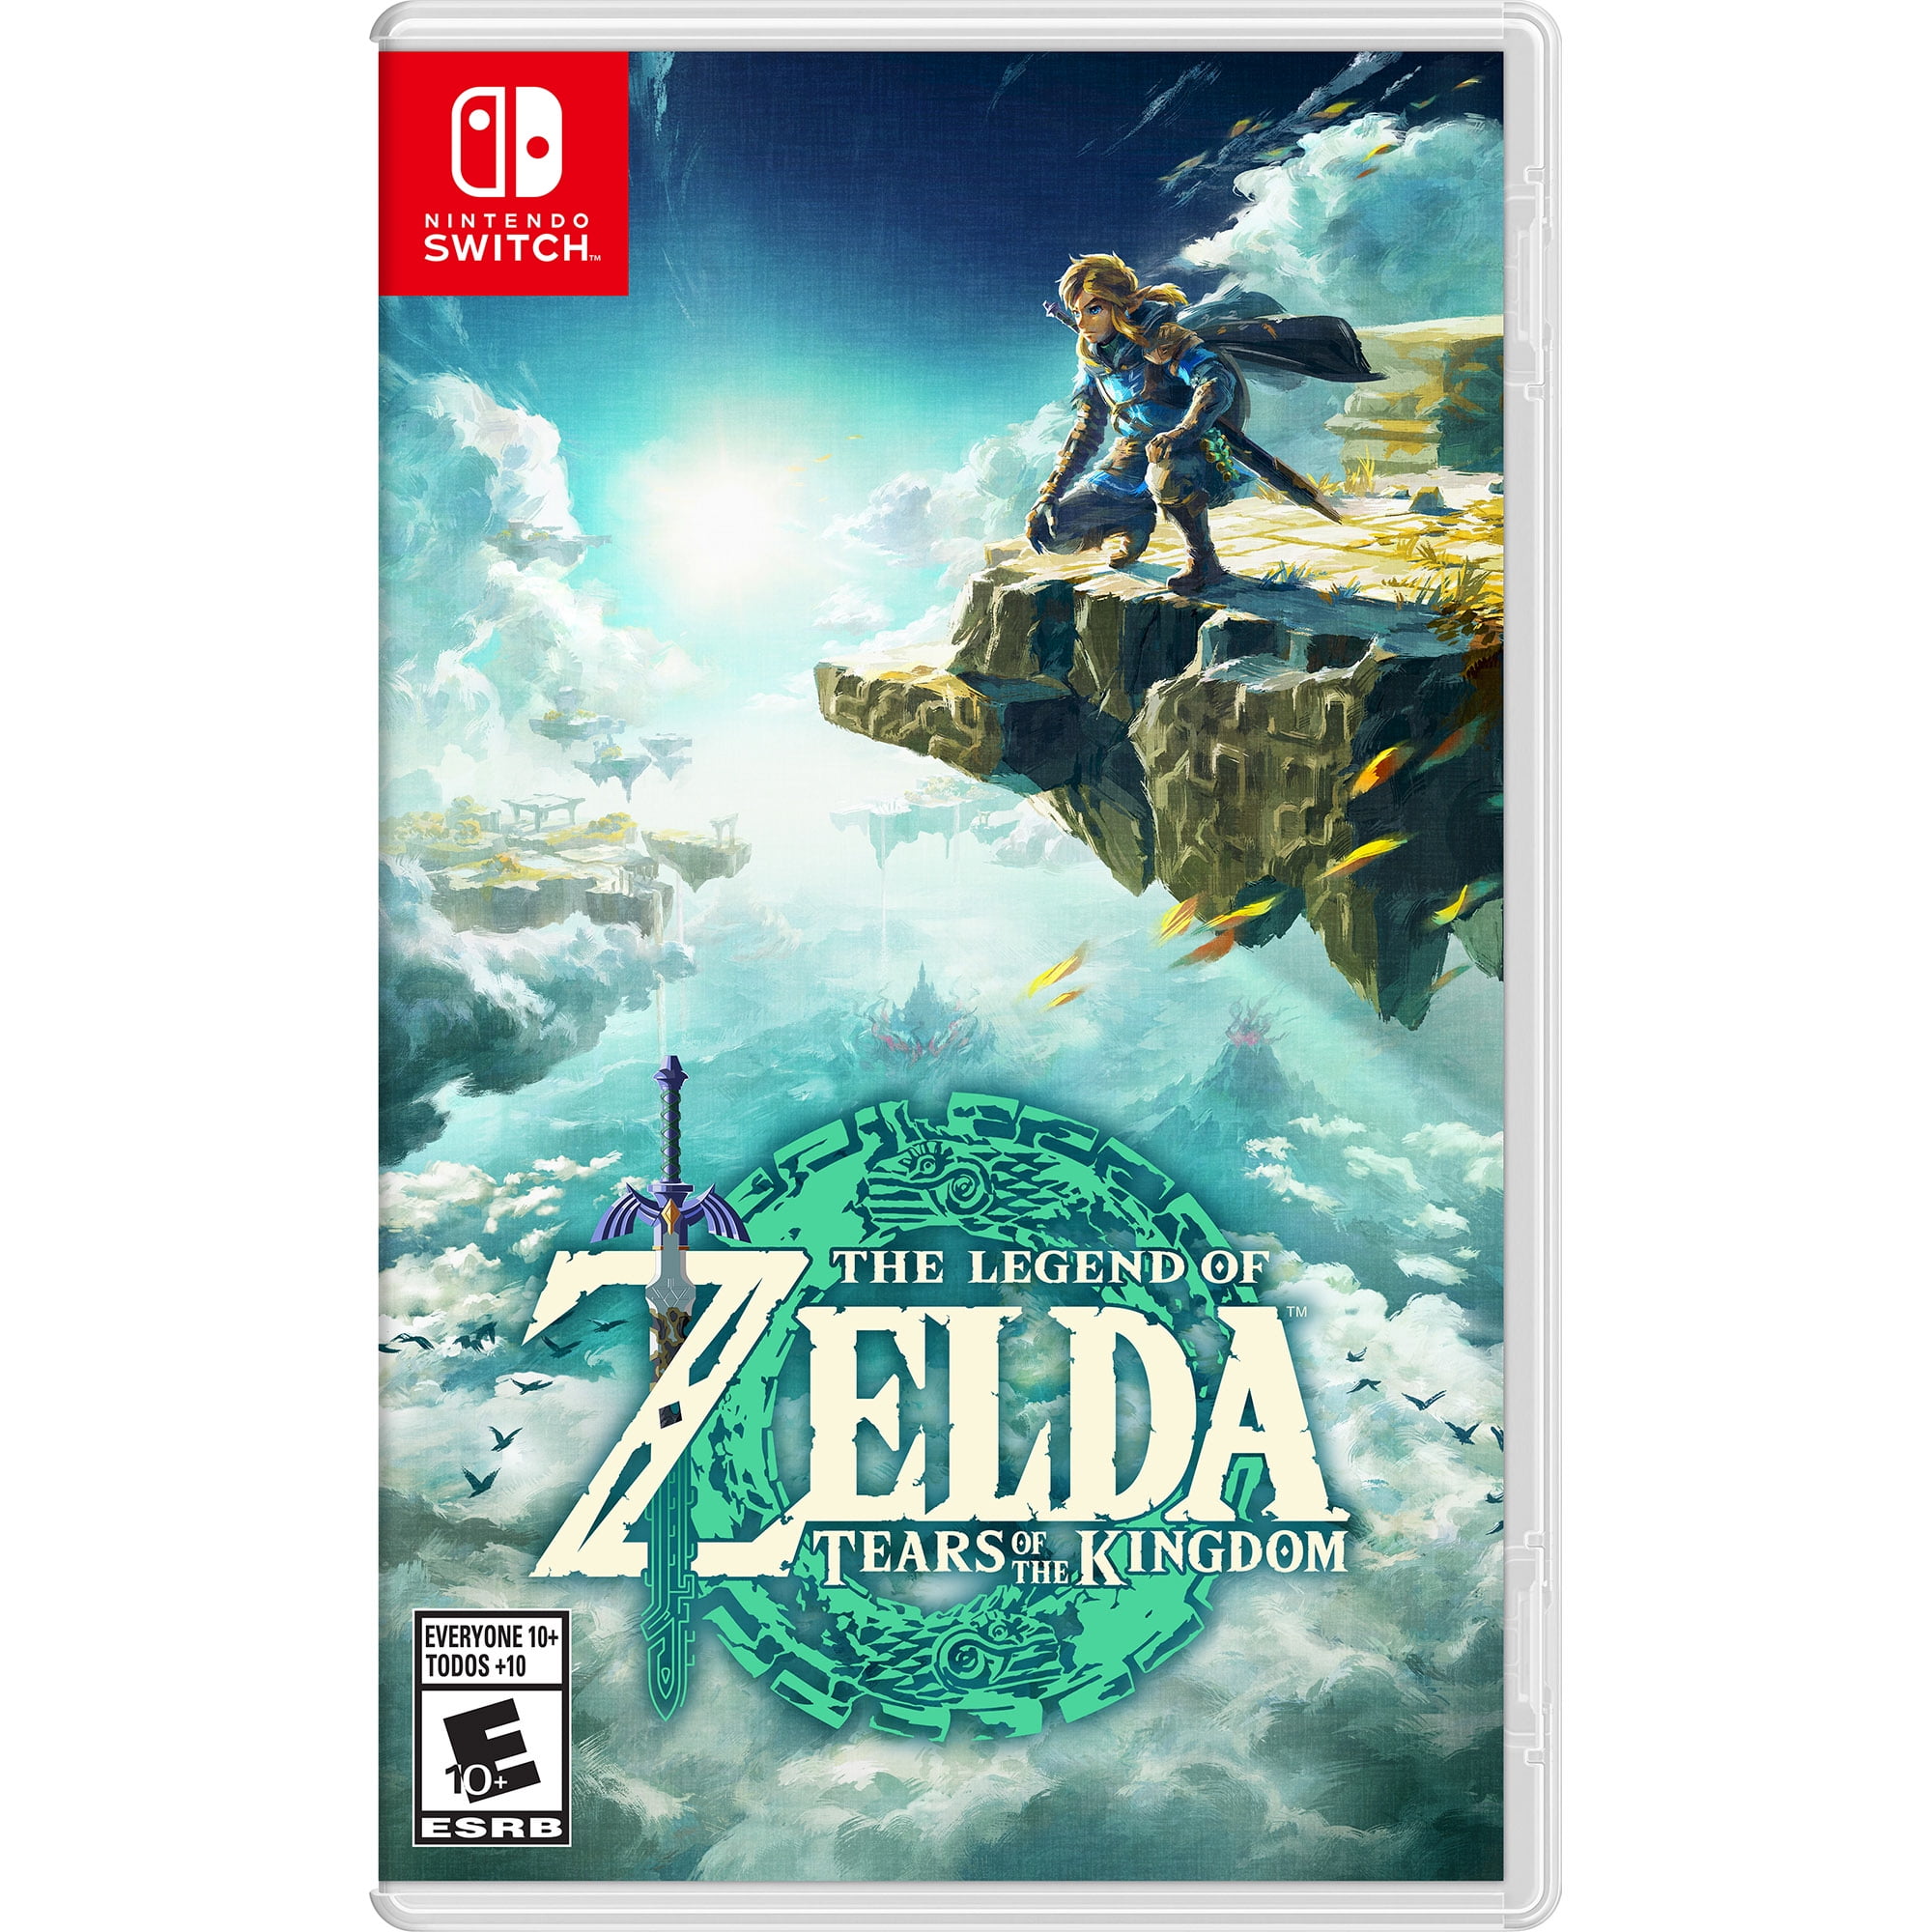 The Legend Zelda: Tears Kingdom of of Switch Edition Collector\'s - Nintendo - the